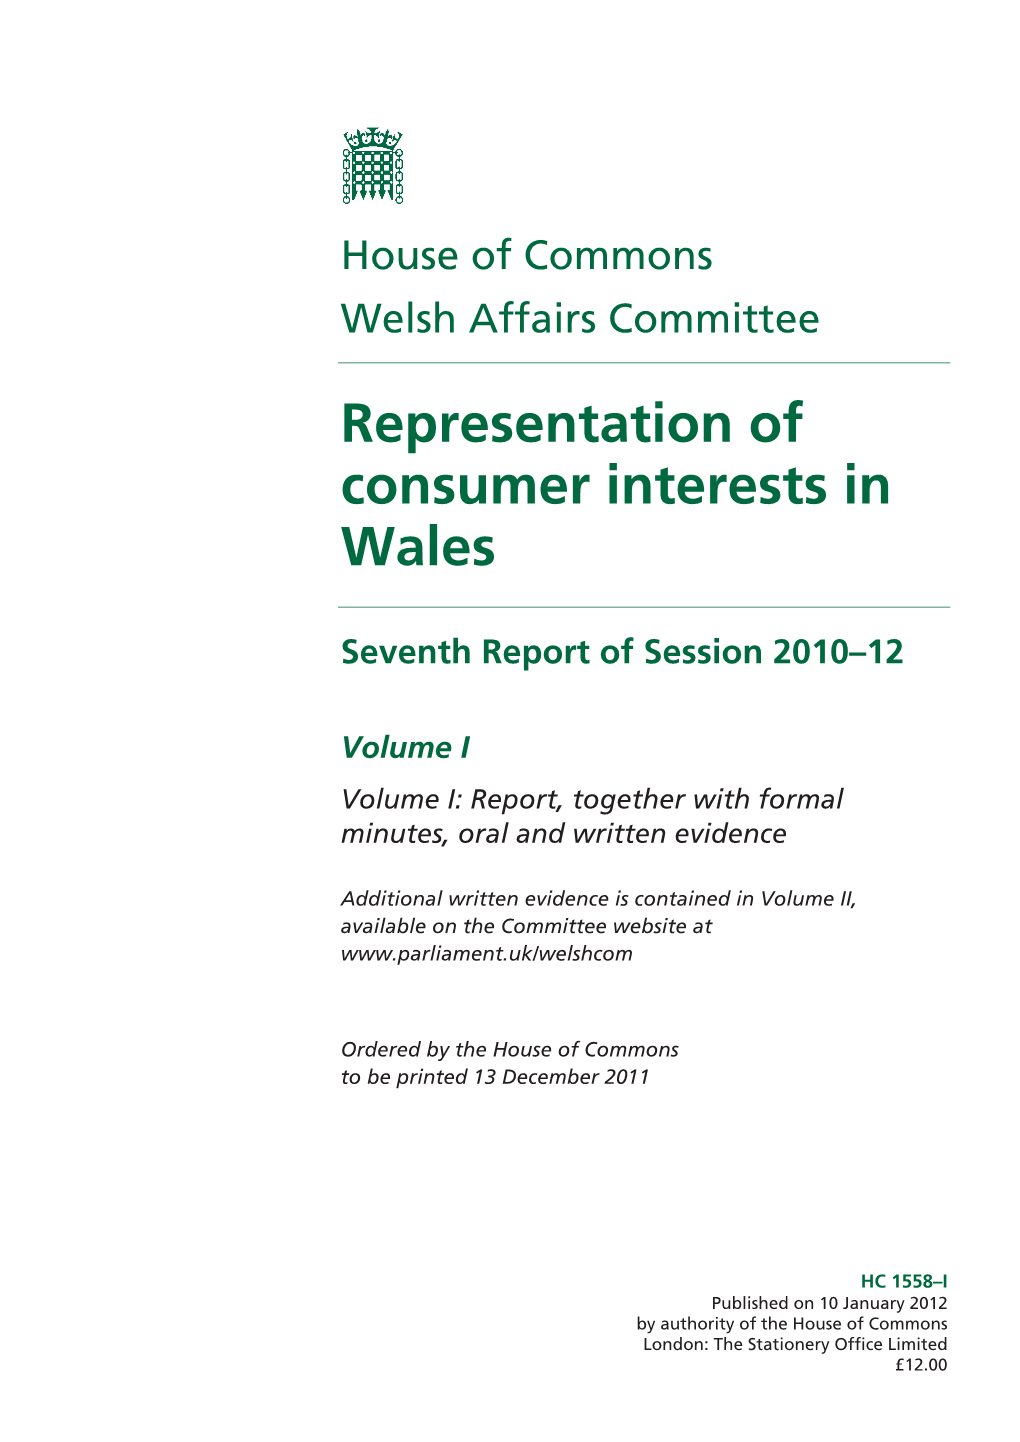 Representation of Consumer Interests in Wales